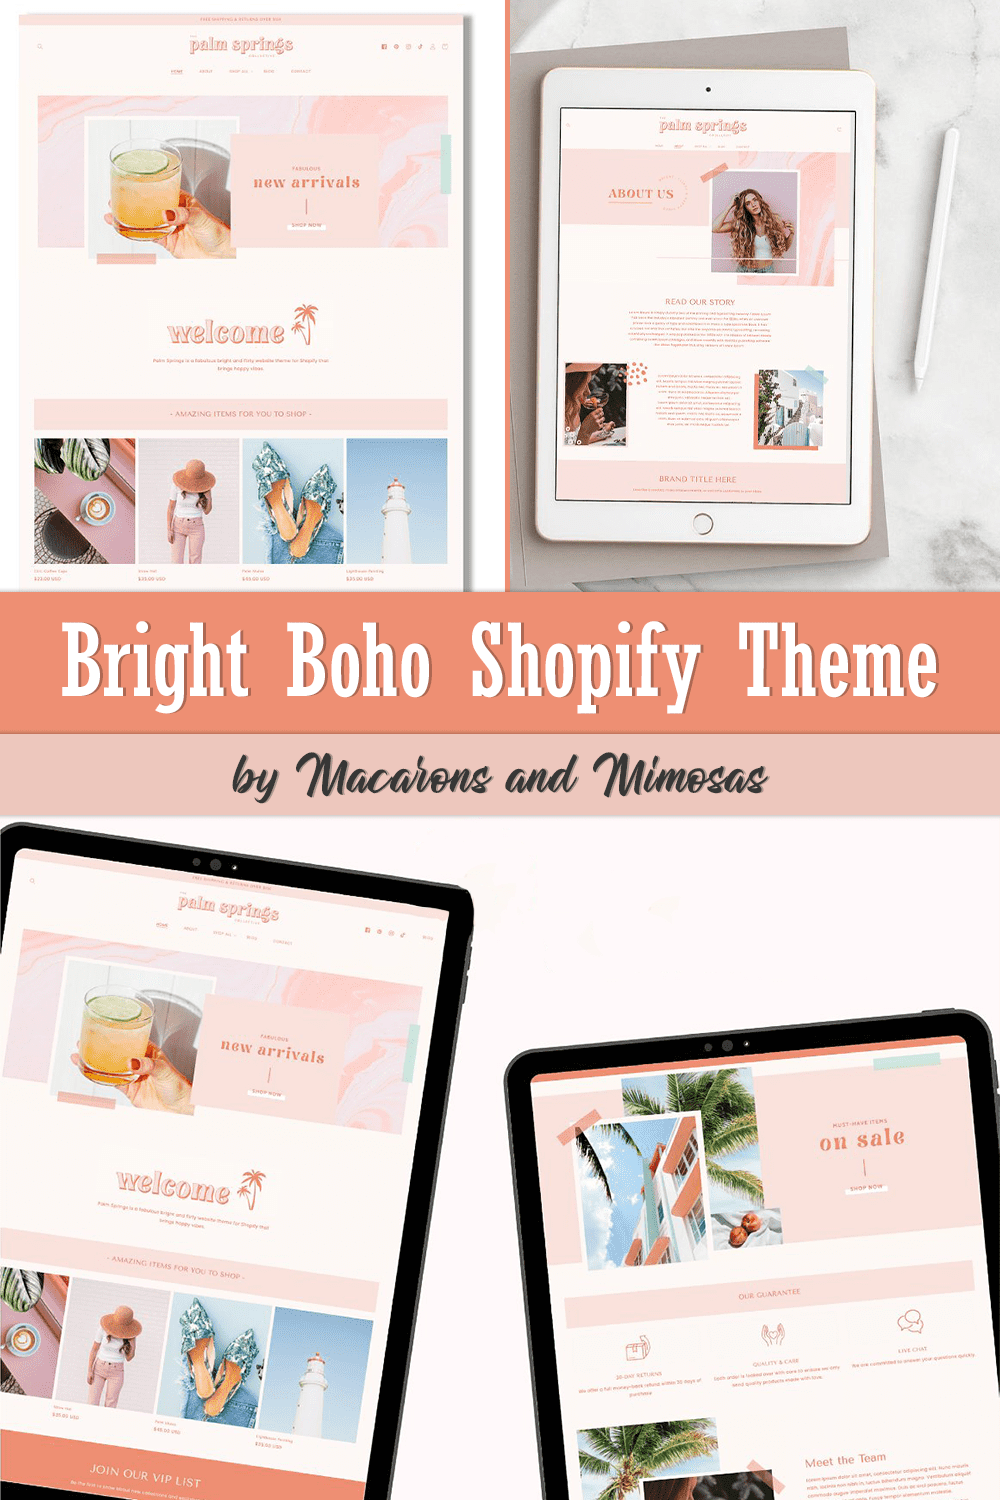 Pack of images of adorable theme shopify pages.